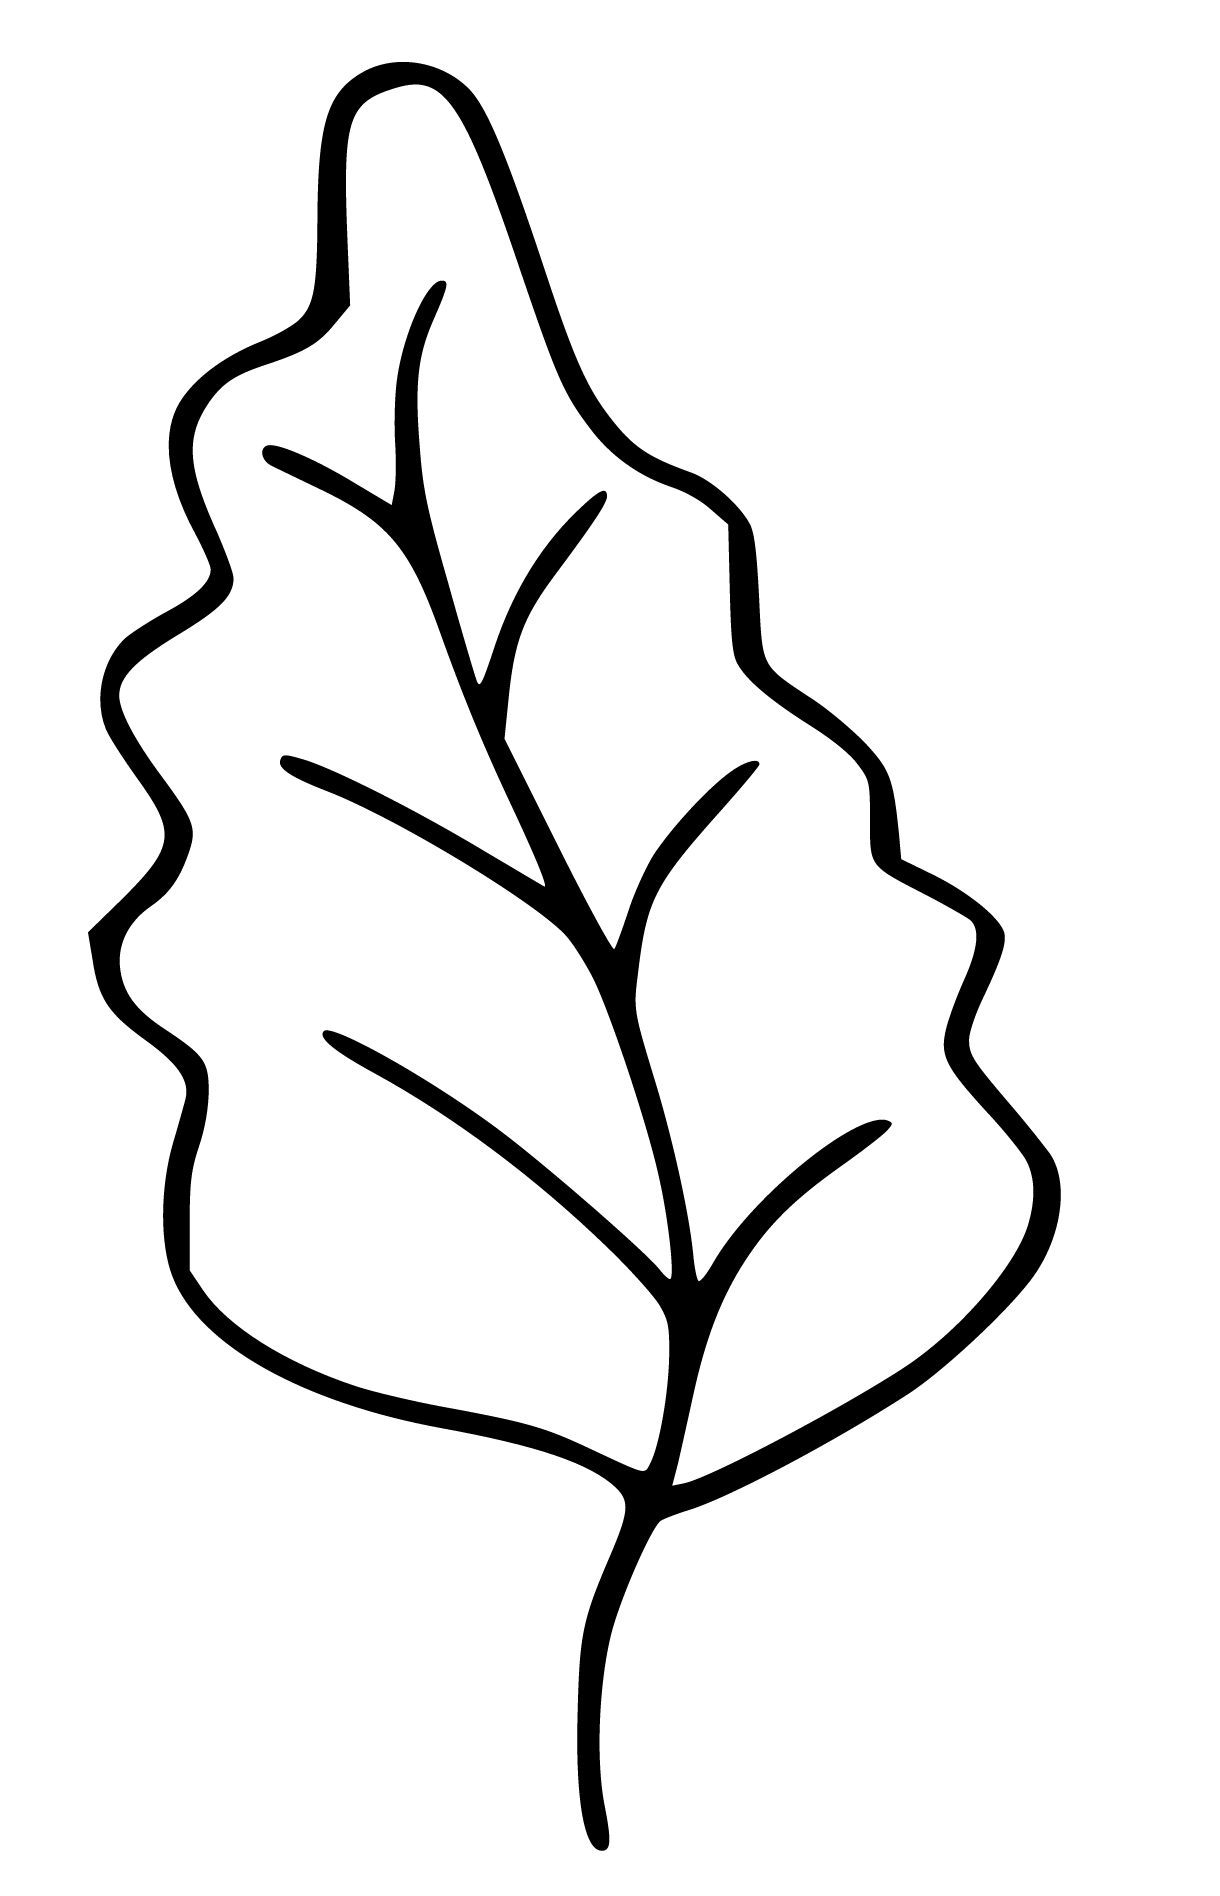 Printable Leaf Coloring Page for kids.